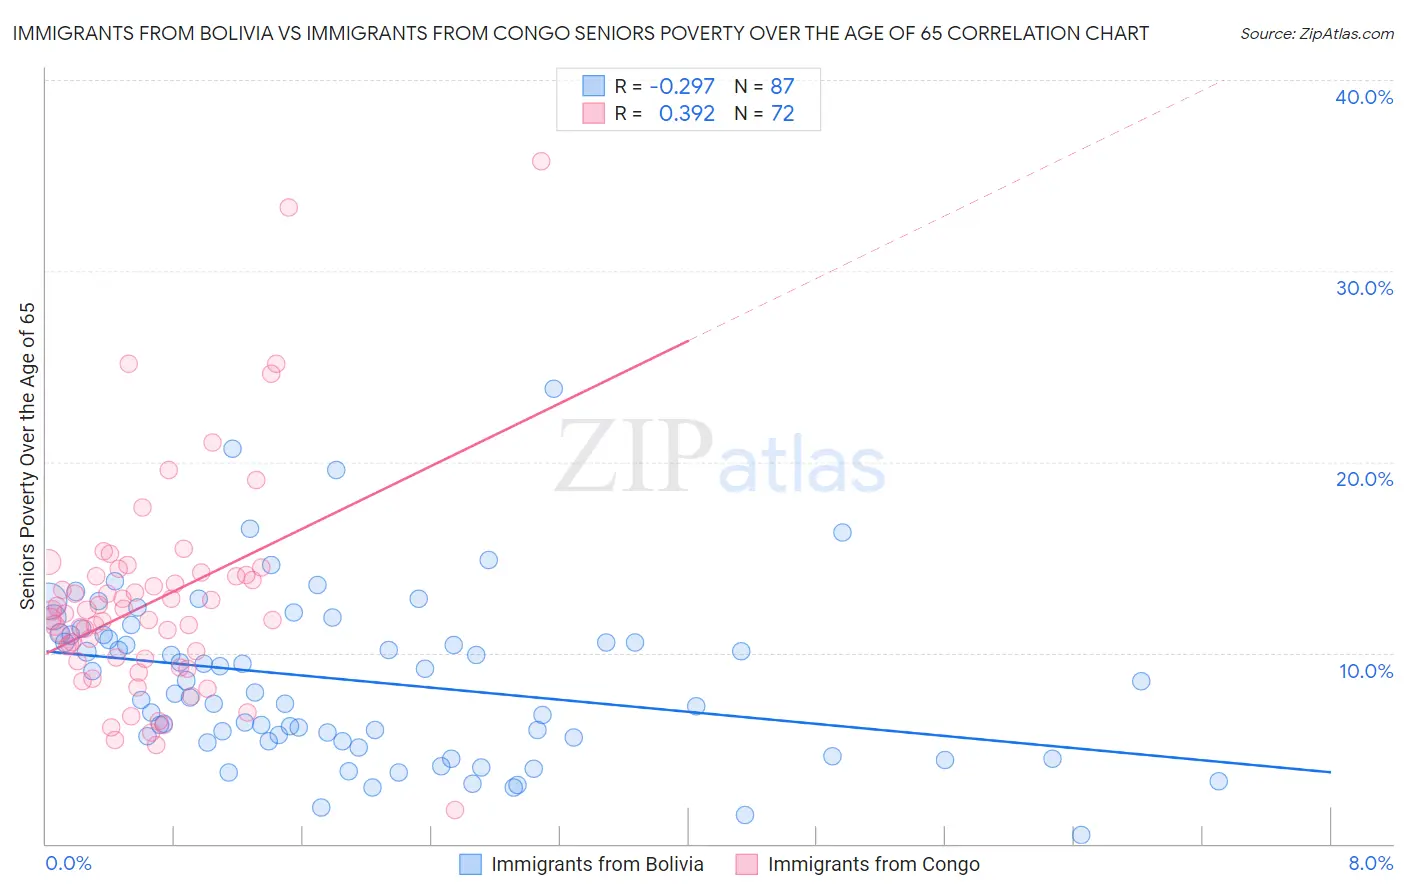 Immigrants from Bolivia vs Immigrants from Congo Seniors Poverty Over the Age of 65